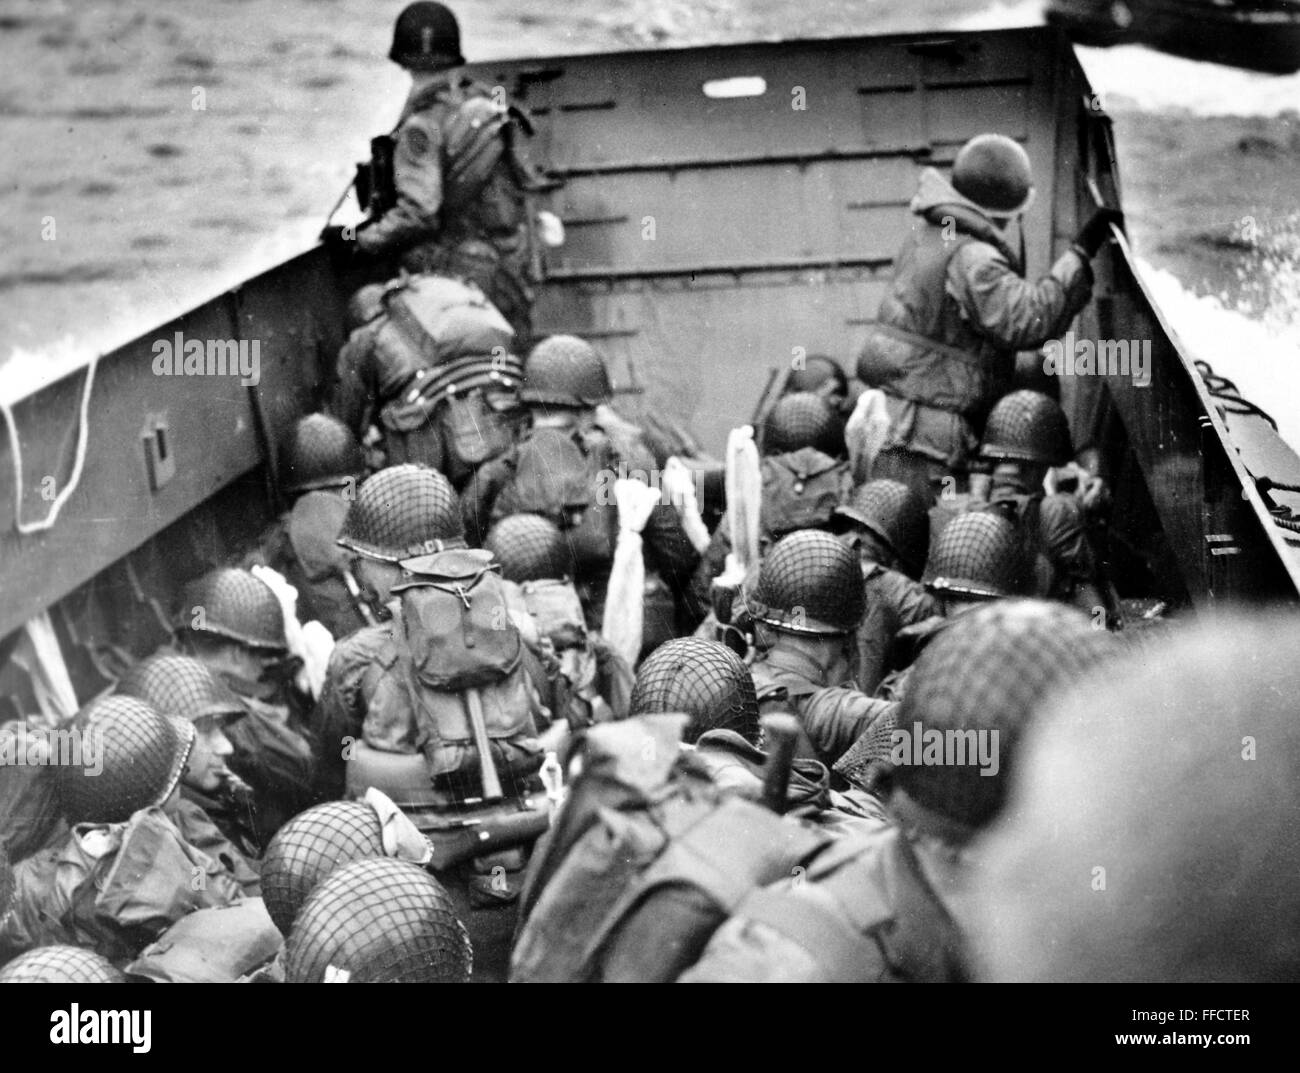 6 Sizes! New World War II Photo Operation Overlord D-Day Landing at Normandy 